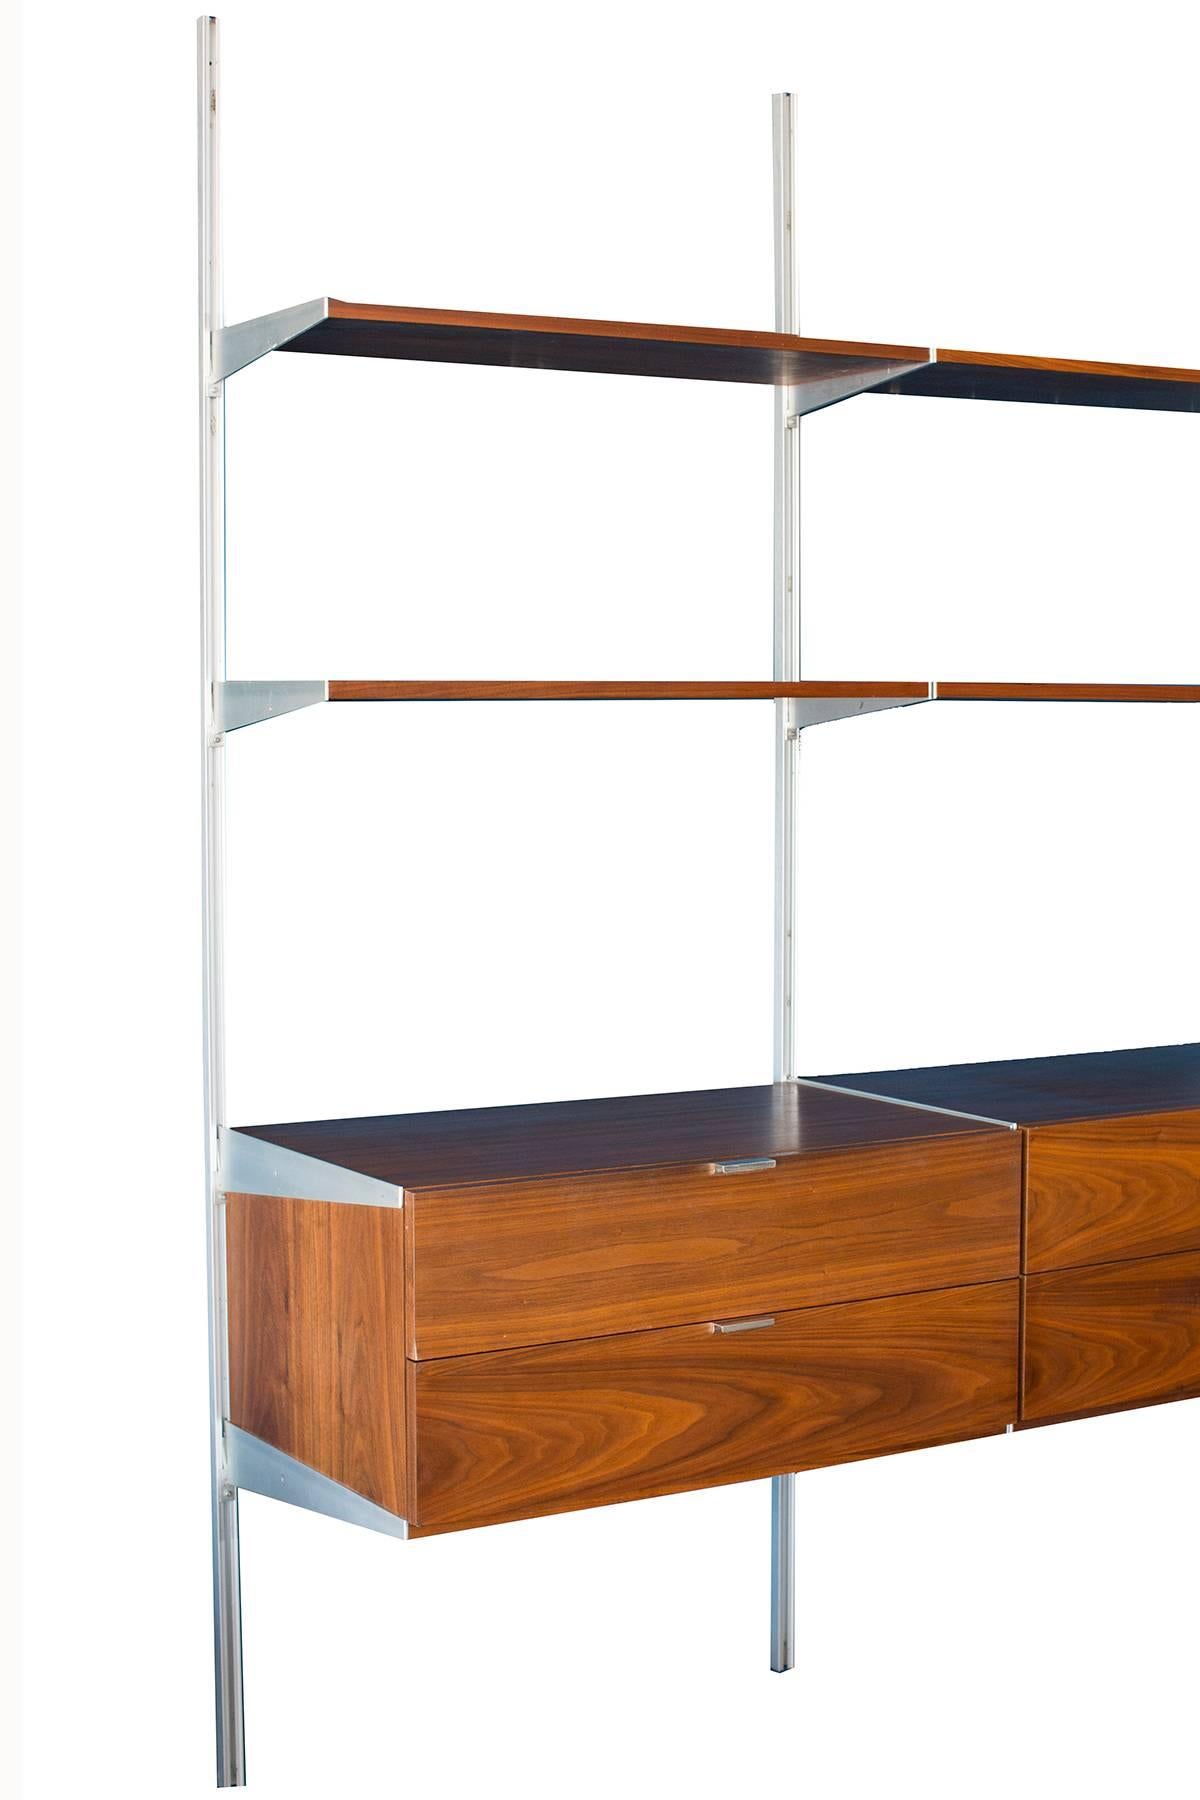 George Nelson for Herman Miller CSS wall-mounted unit, circa early 1960s. This example has six shelves and three chests with two drawers each. Drawer fronts are beautifully grained walnut as are the shelves.
  